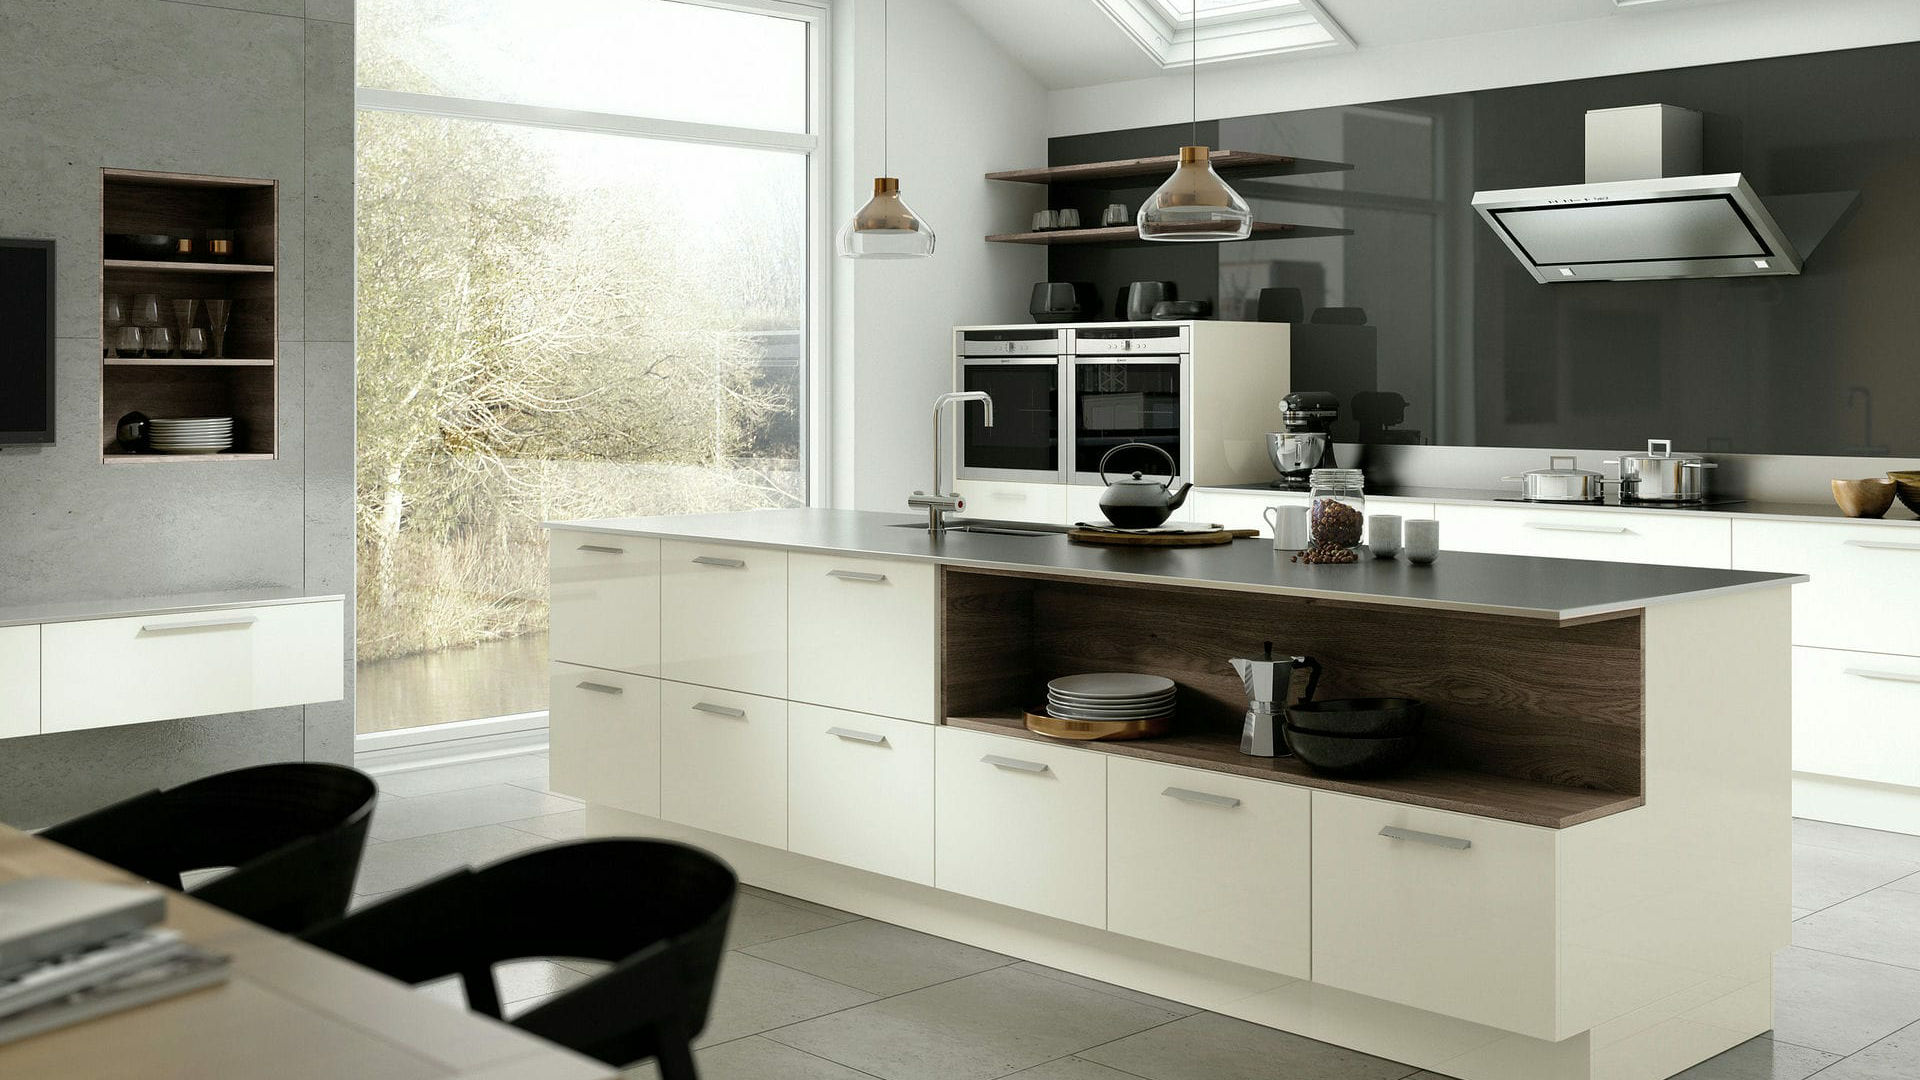 High gloss porcelain kitchens designed to reflect light beautifully, making spaces brighter and more welcoming